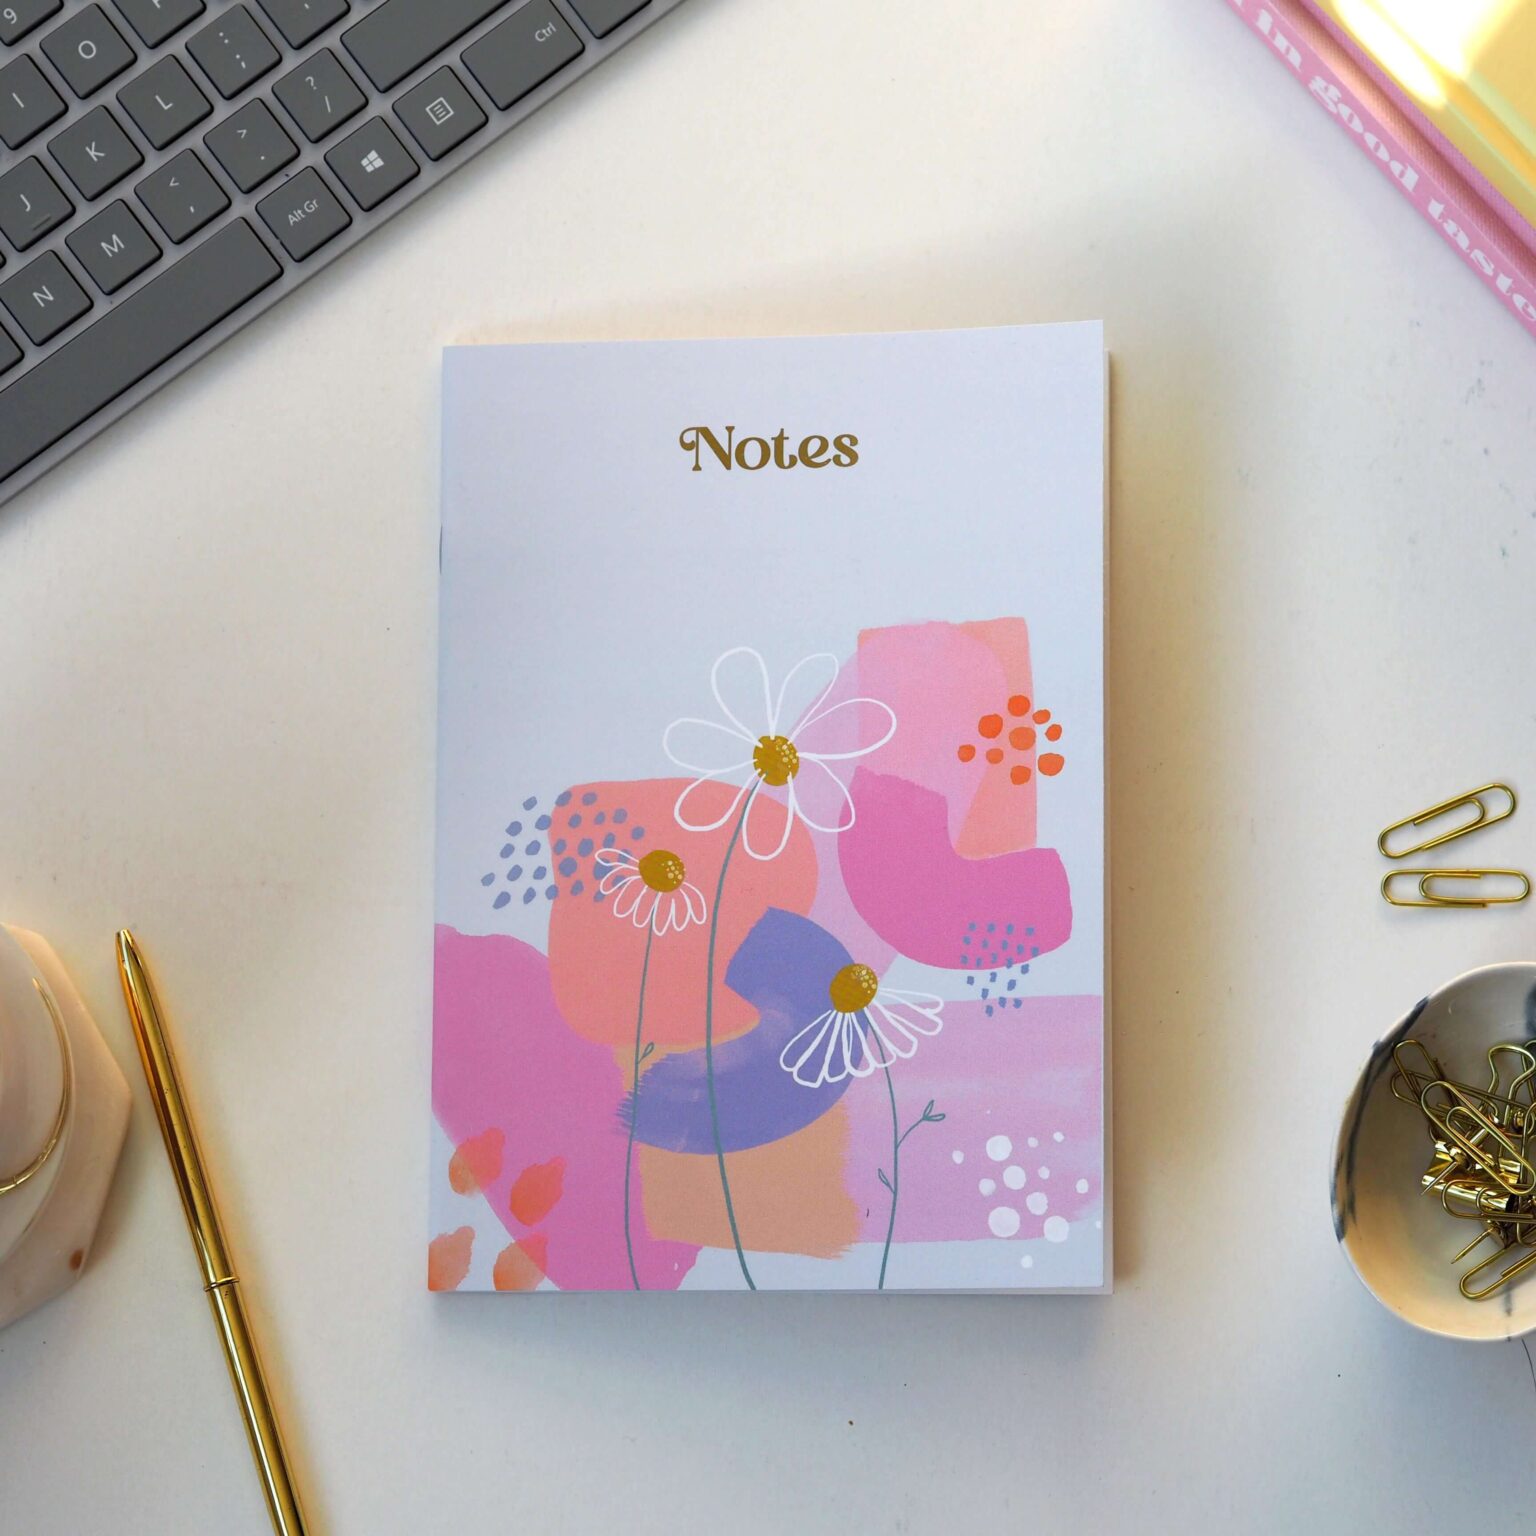 Daisy floral design luxury notebook with gold detail